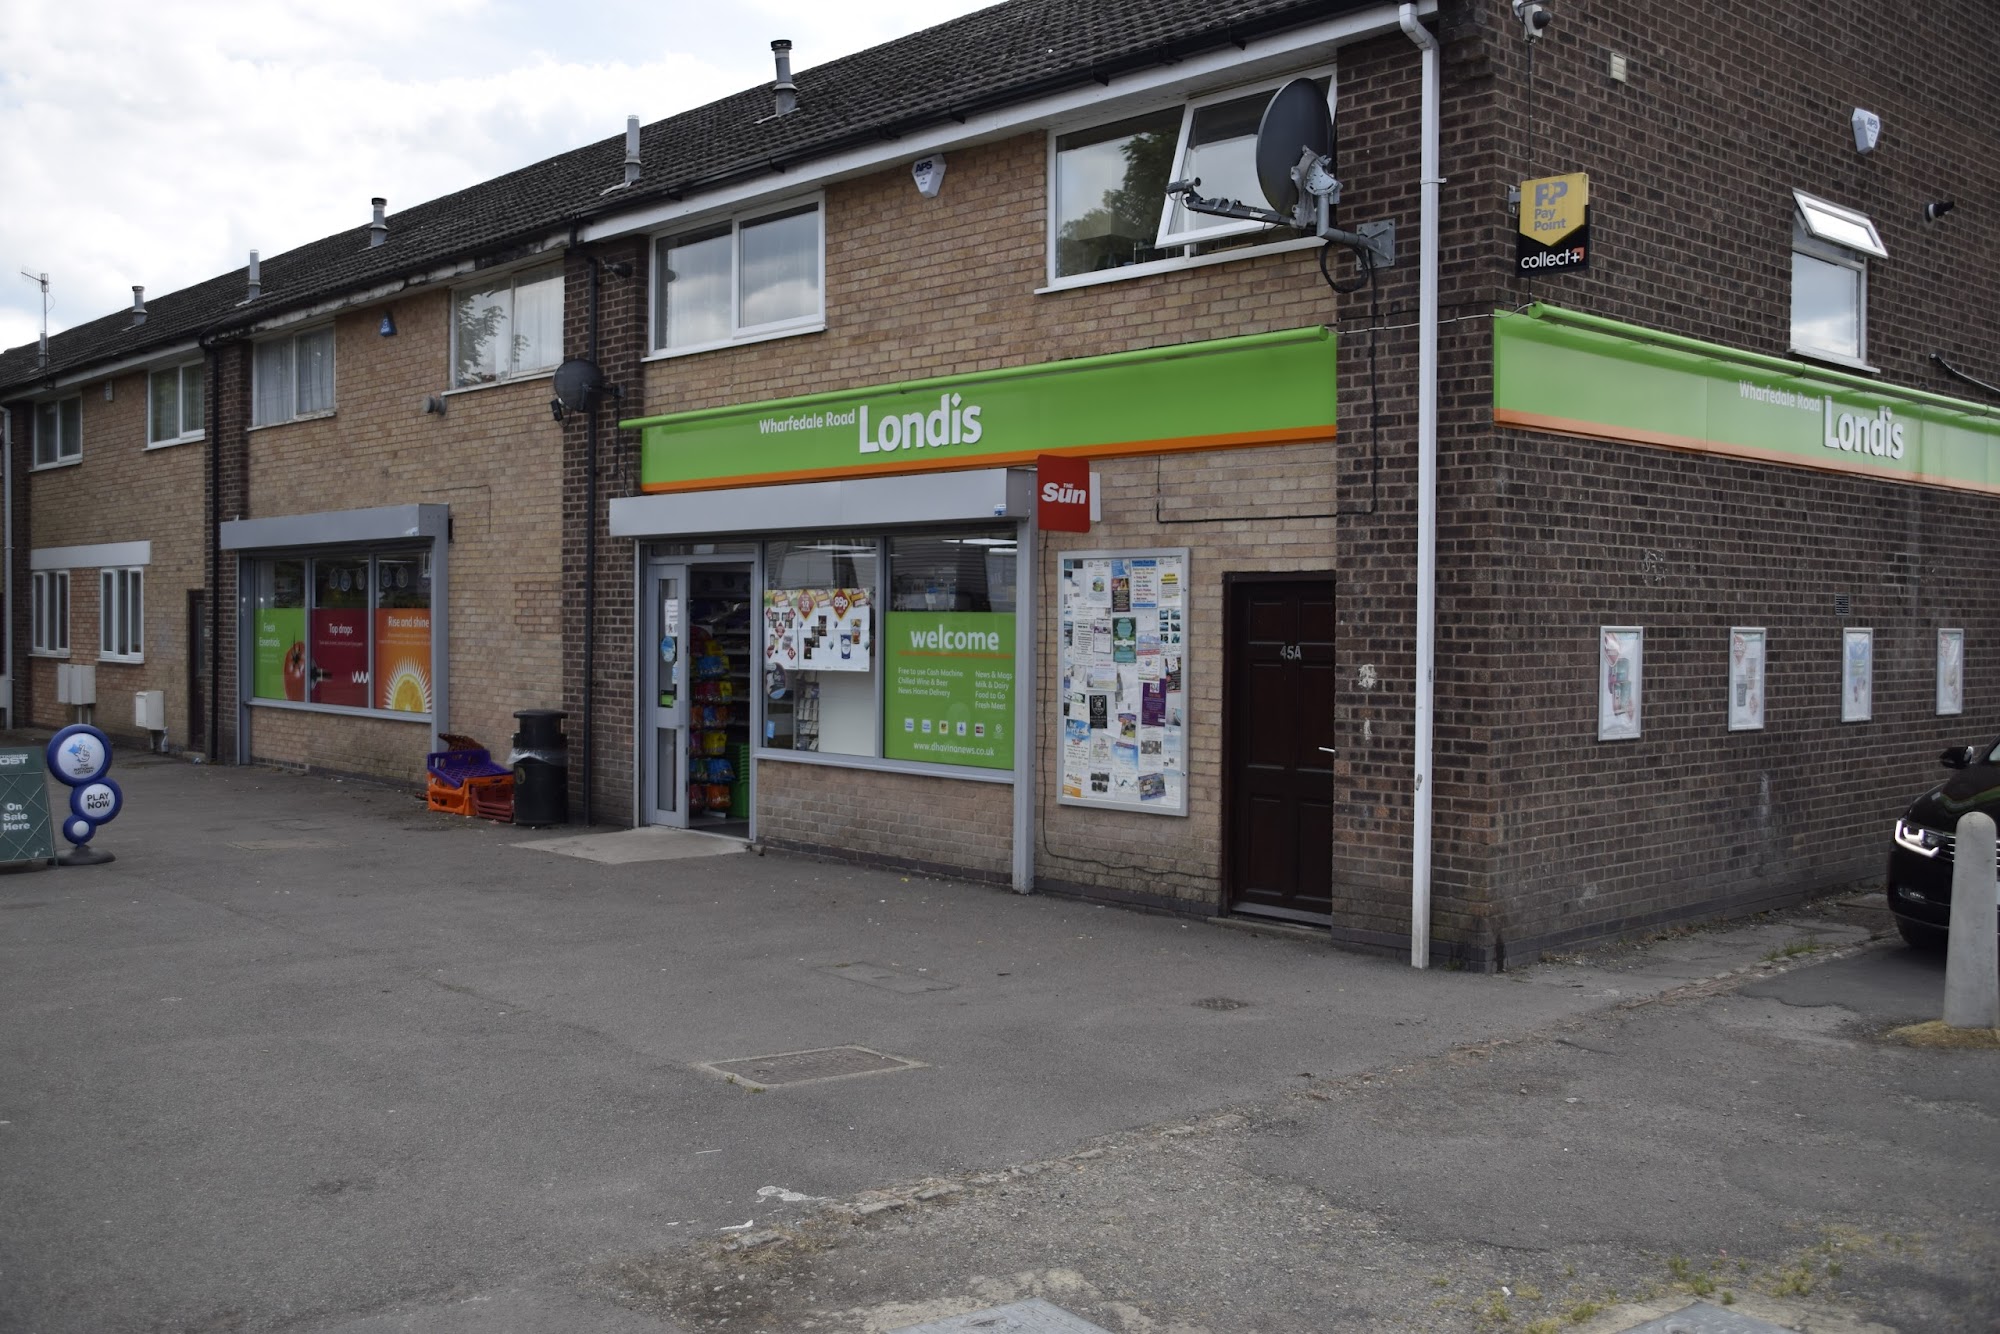 Wharfedale Road Londis, Dhavina’s News, the paper shop